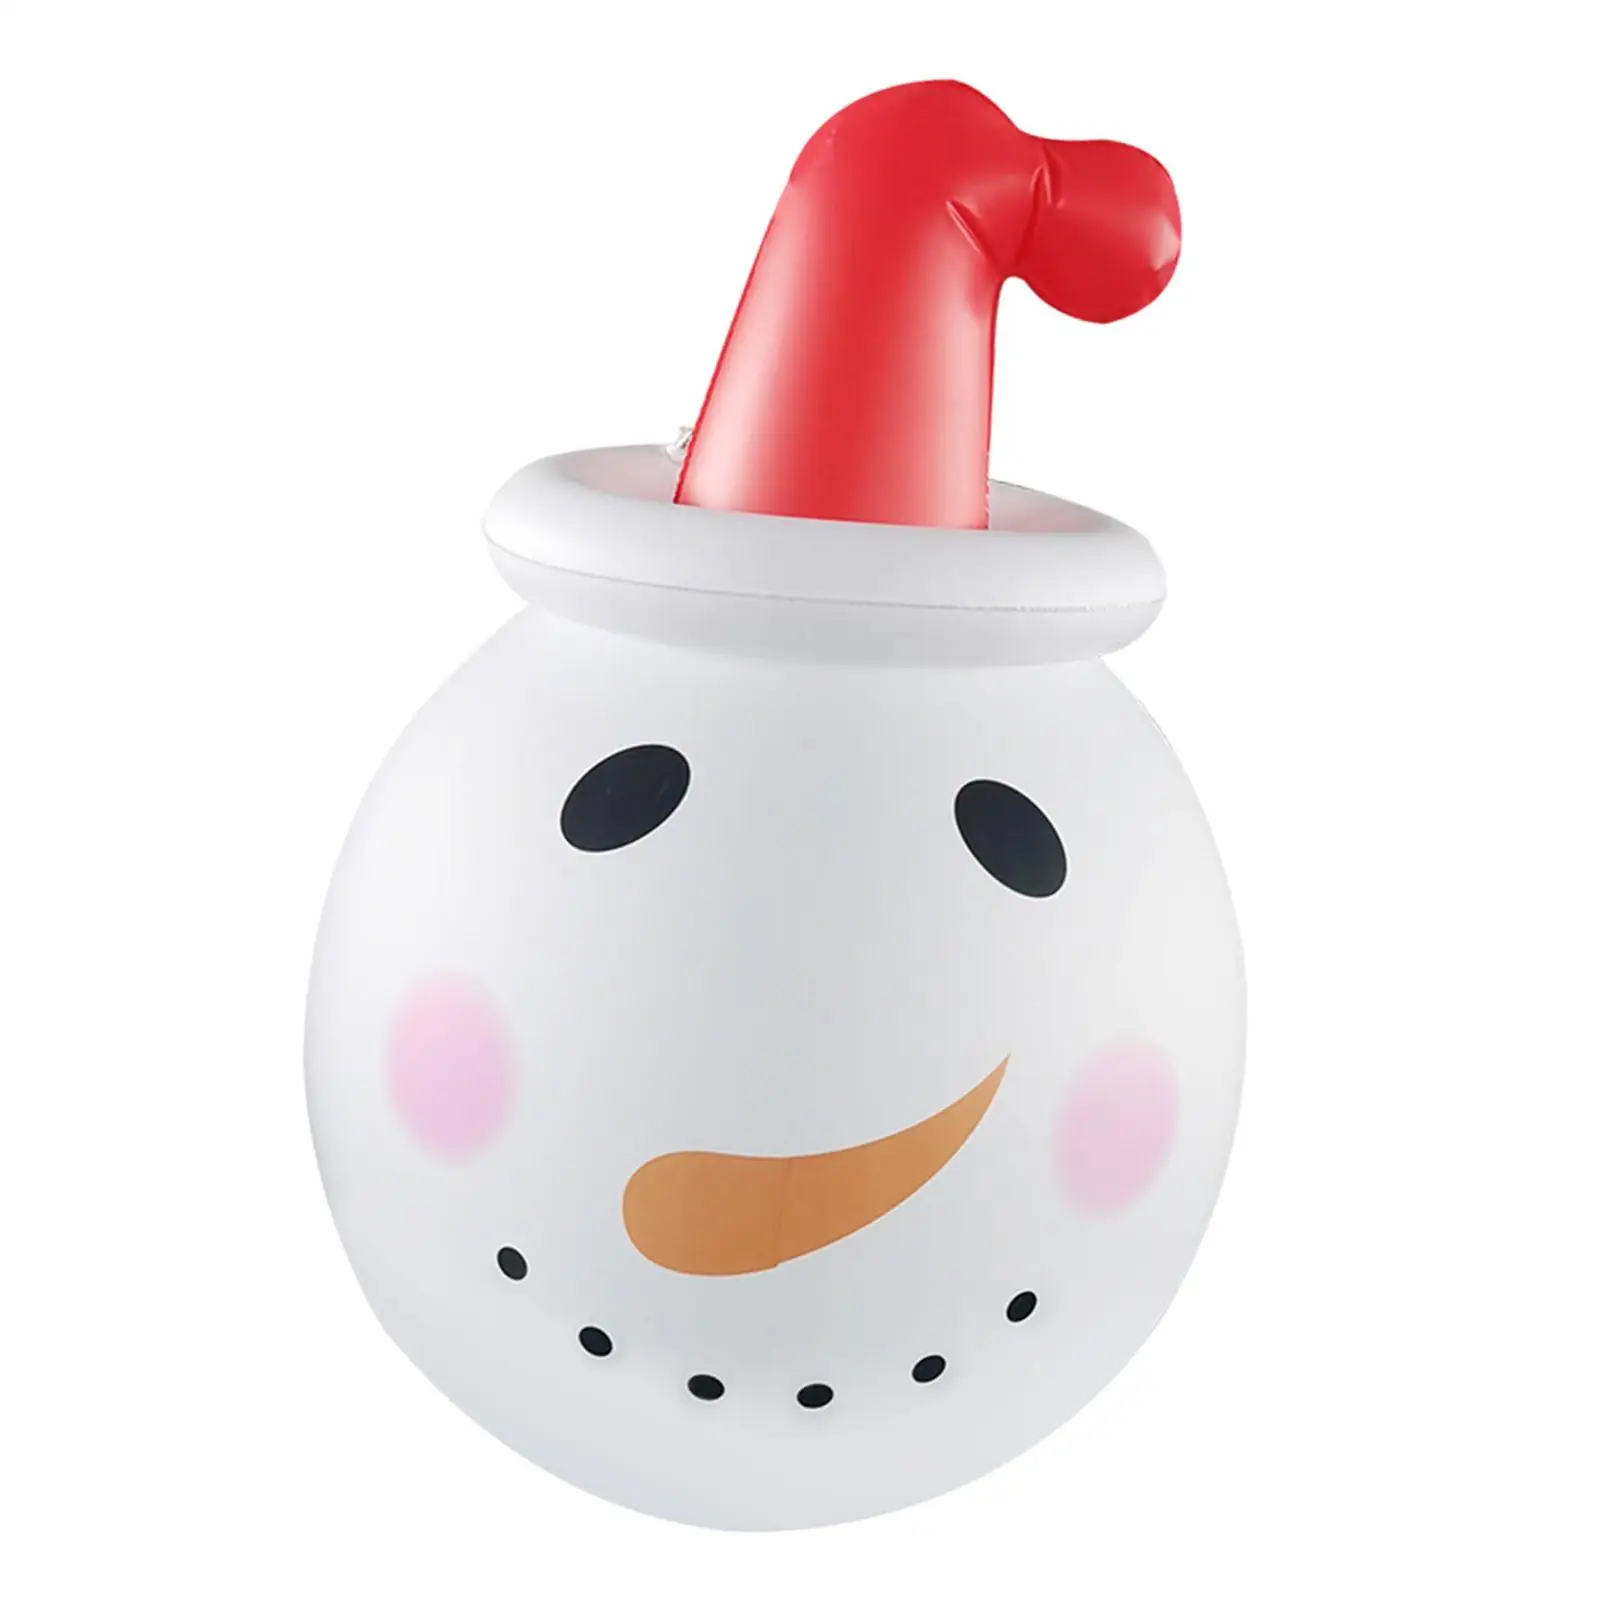 Christmas Inflatable Snowman Ornament for Backyard Office Home Furnishings